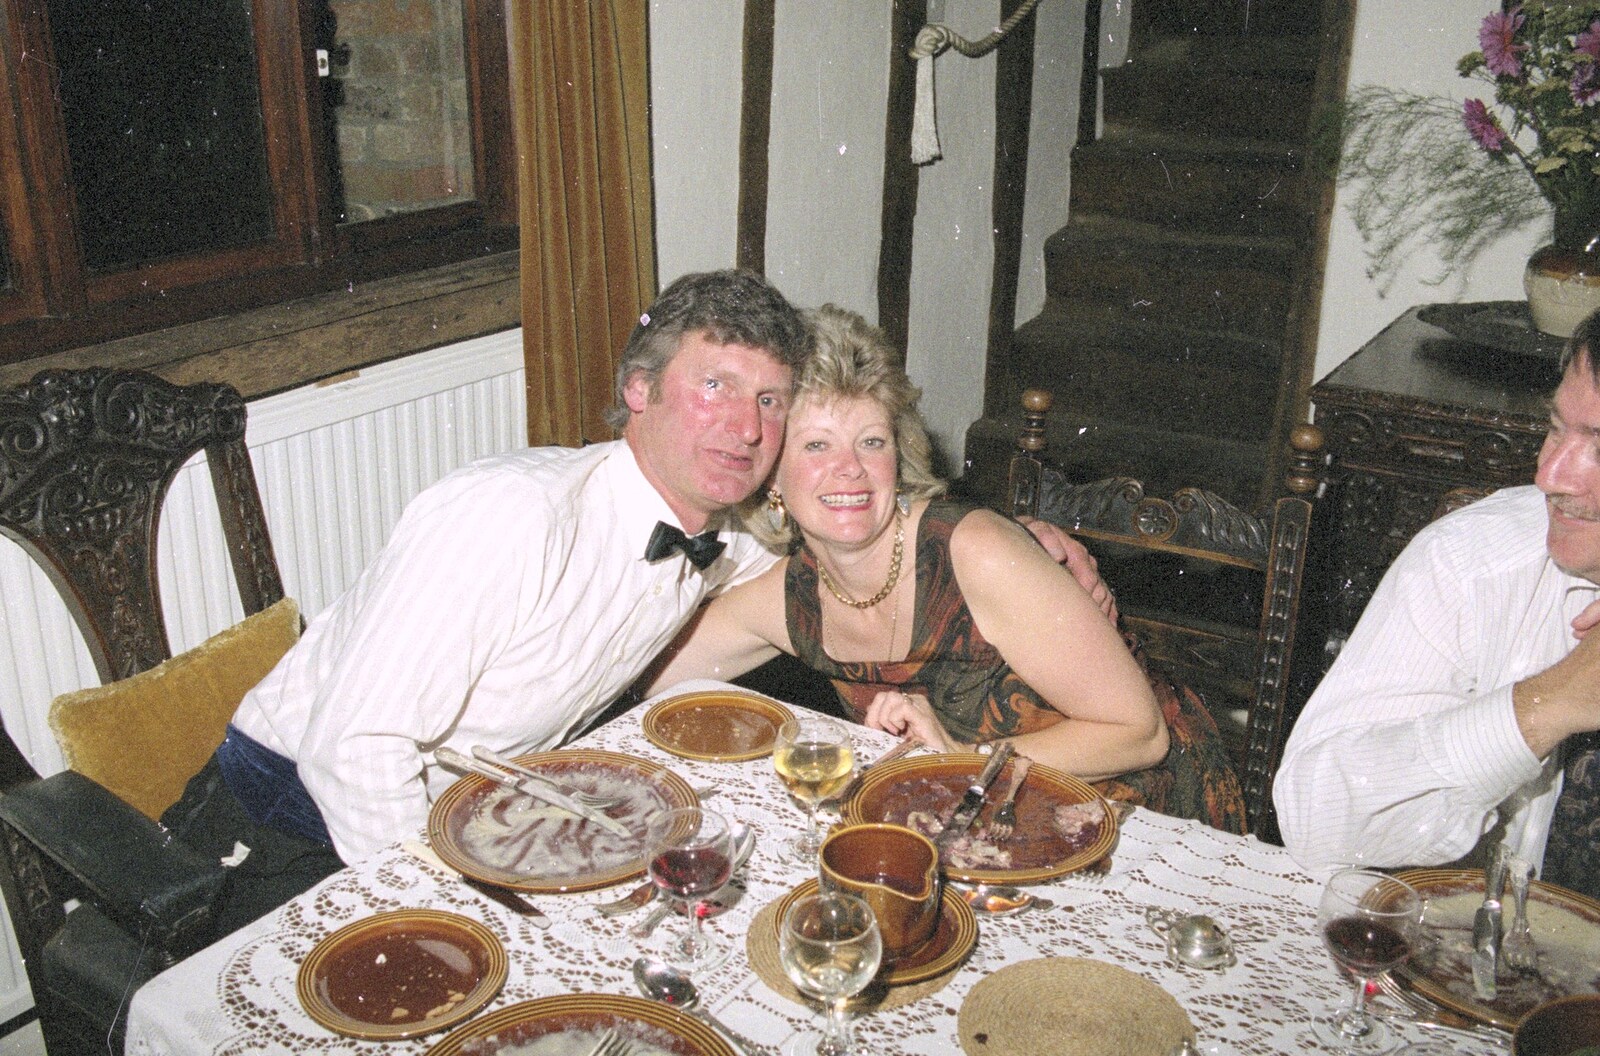 Geoff and Sheila from Nosher's Dinner Party, Stuston, Suffolk - 14th September 1991